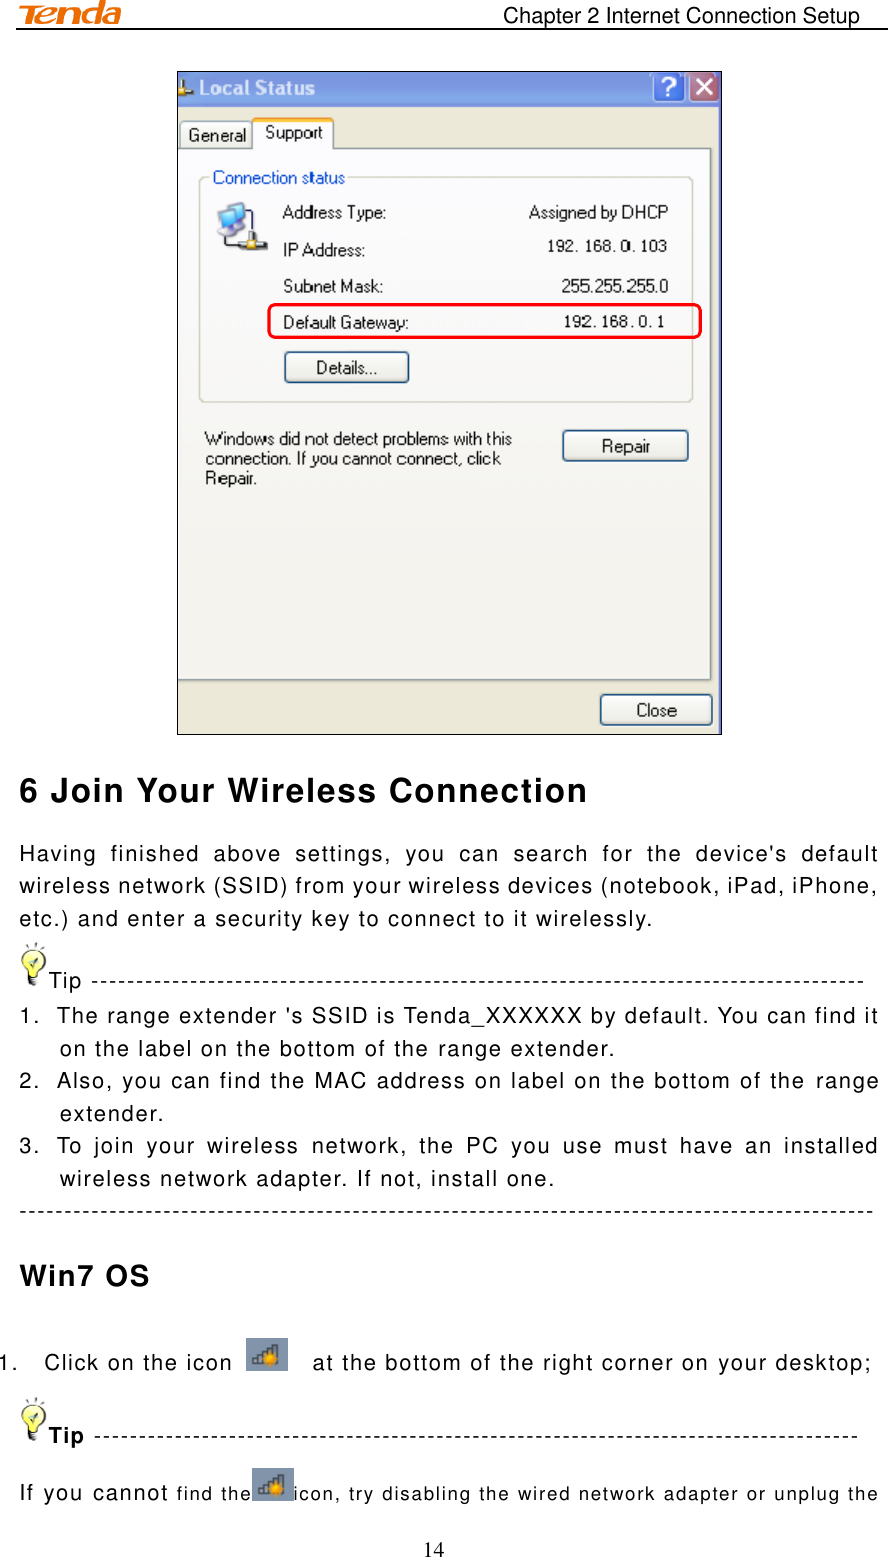                                                                       Chapter 2 Internet Connection Setup 14  6 Join Your Wireless Connection Having  finished  above  settings,  you  can  search  for  the  device&apos;s  default wireless network (SSID) from your wireless devices (notebook, iPad, iPhone, etc.) and enter a security key to connect to it wirelessly. Tip -------------------------------------------------------------------------------------- 1.  The range extender &apos;s SSID is Tenda_XXXXXX by default. You can find it on the label on the bottom of the range extender. 2.  Also, you can find the MAC address on label on the bottom of the  range extender.   3.  To  join  your  wireless  network,  the  PC  you  use  must  have  an  installed wireless network adapter. If not, install one. ----------------------------------------------------------------------------------------------- Win7 OS 1.  Click on the icon    at the bottom of the right corner on your desktop; Tip ------------------------------------------------------------------------------------- If you cannot find the icon, try disabling the wired network adapter or unplug the 